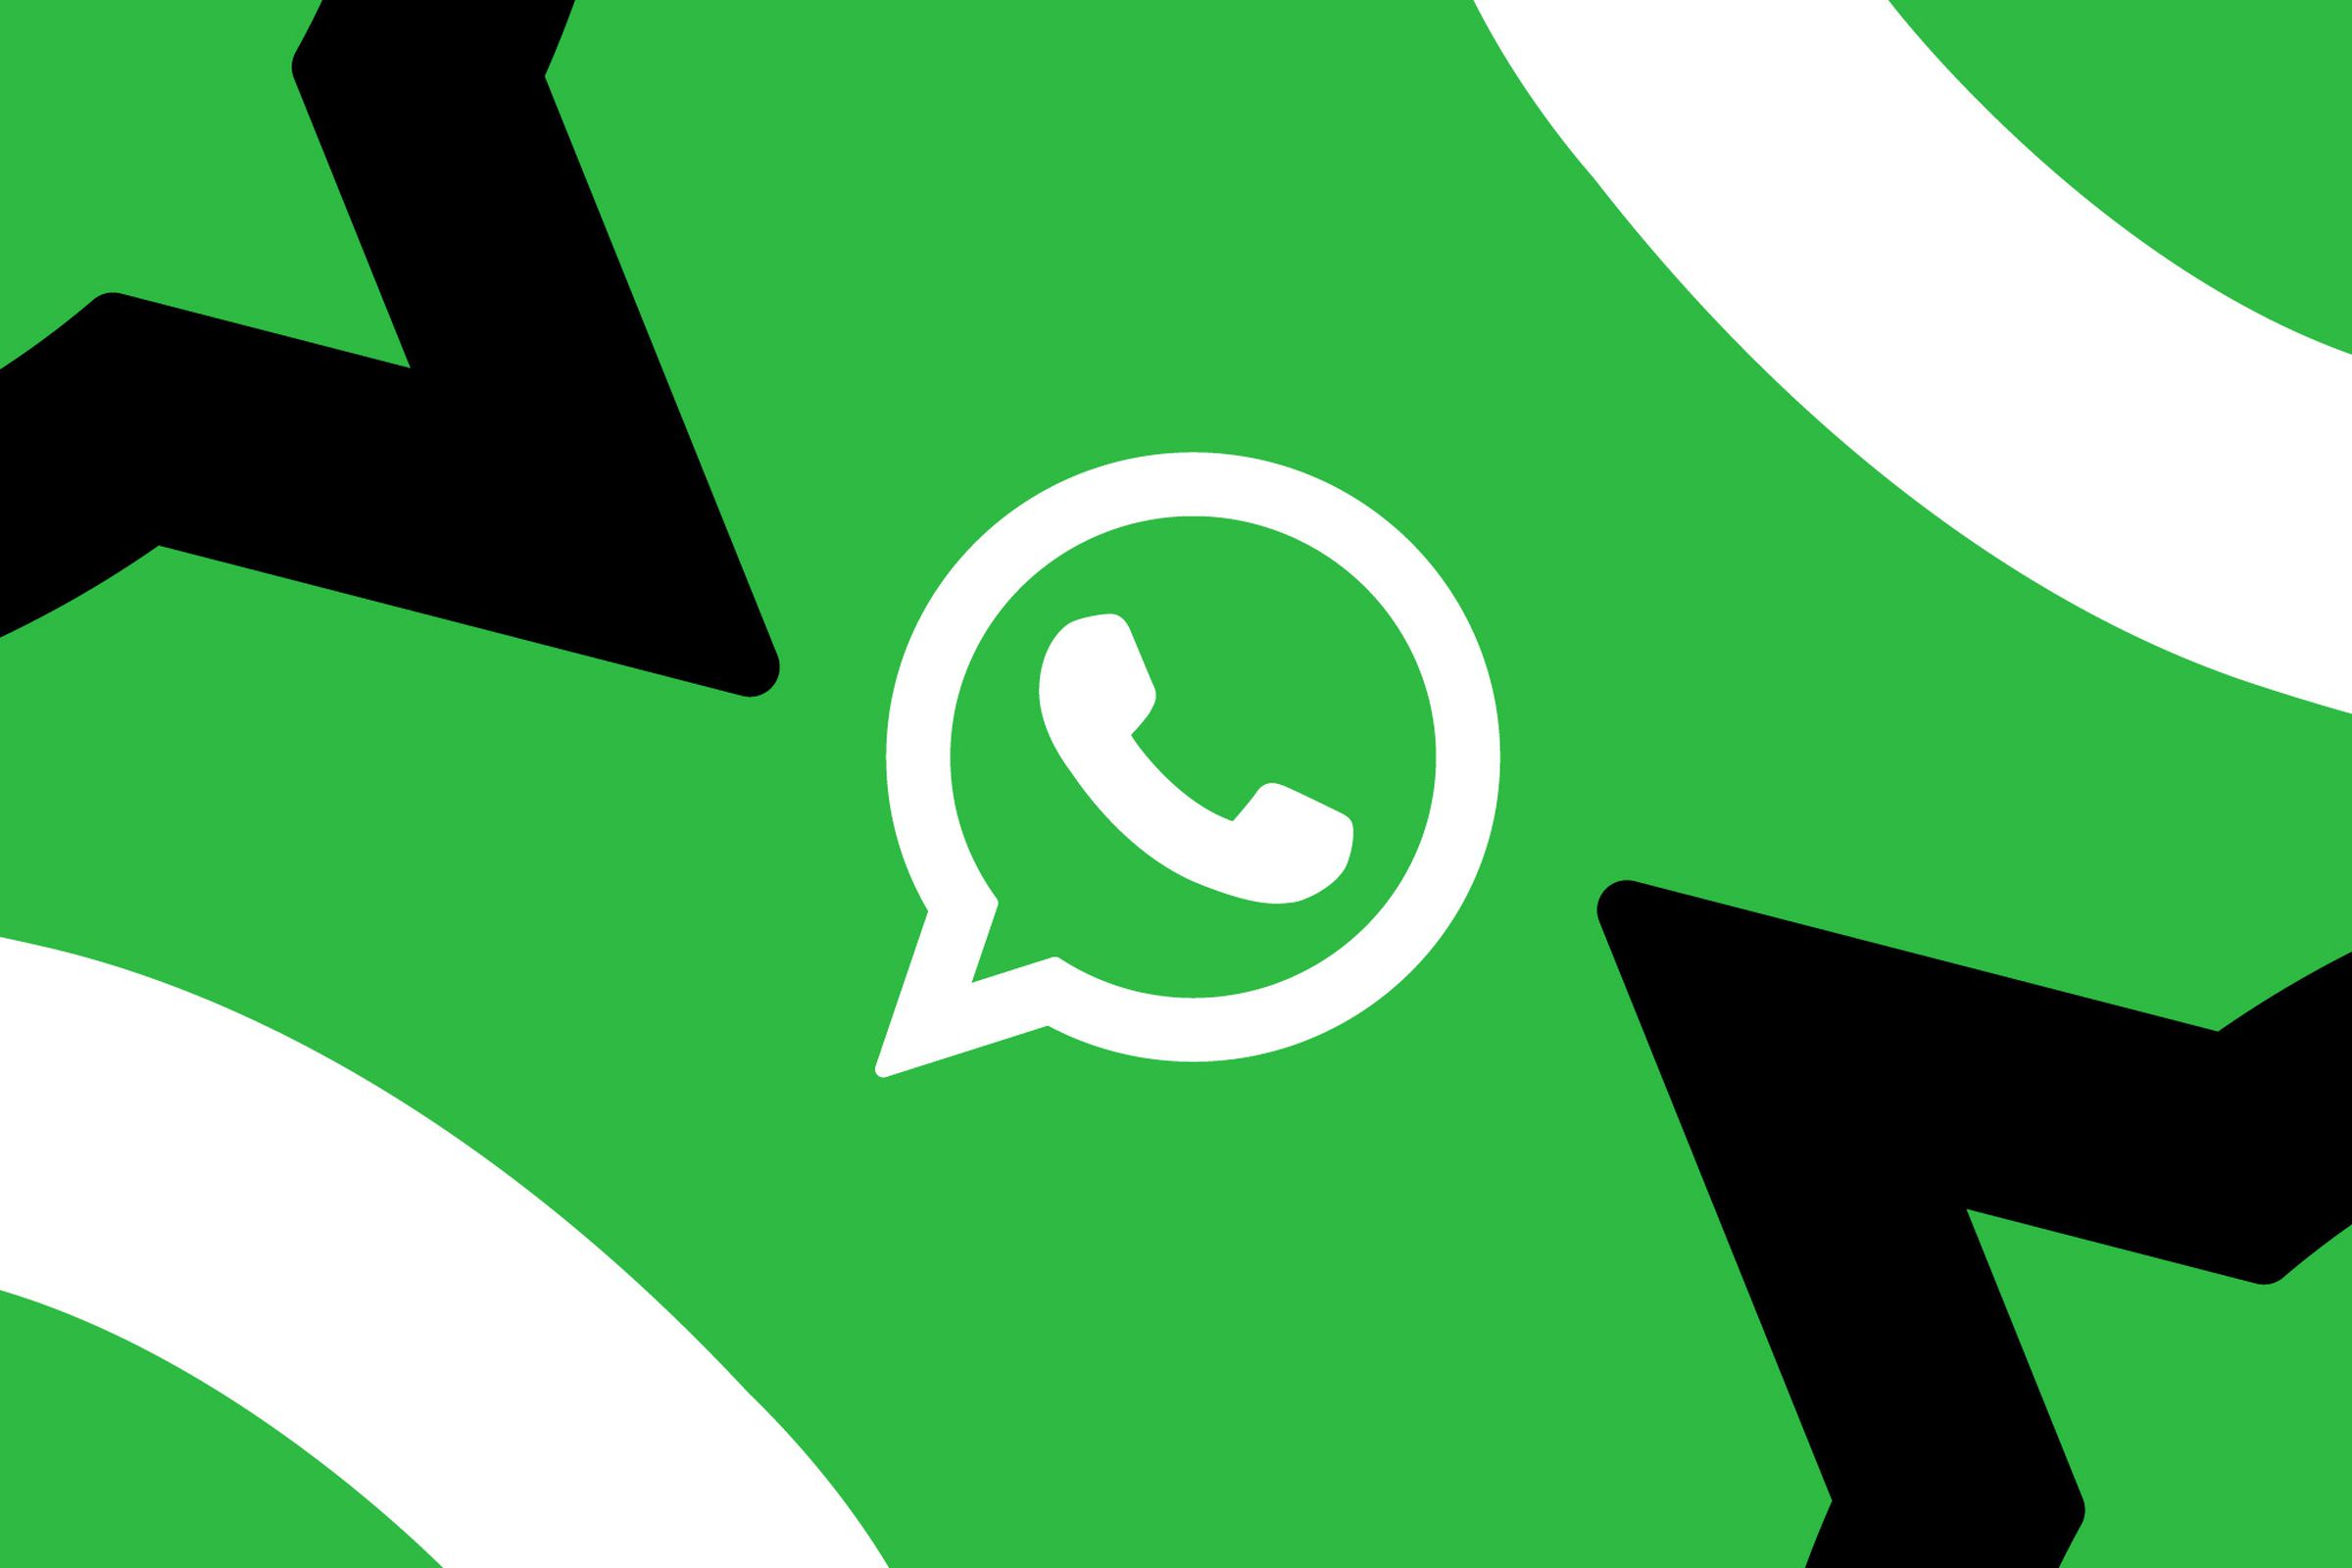 WhatApp logo on a green, black, and white background